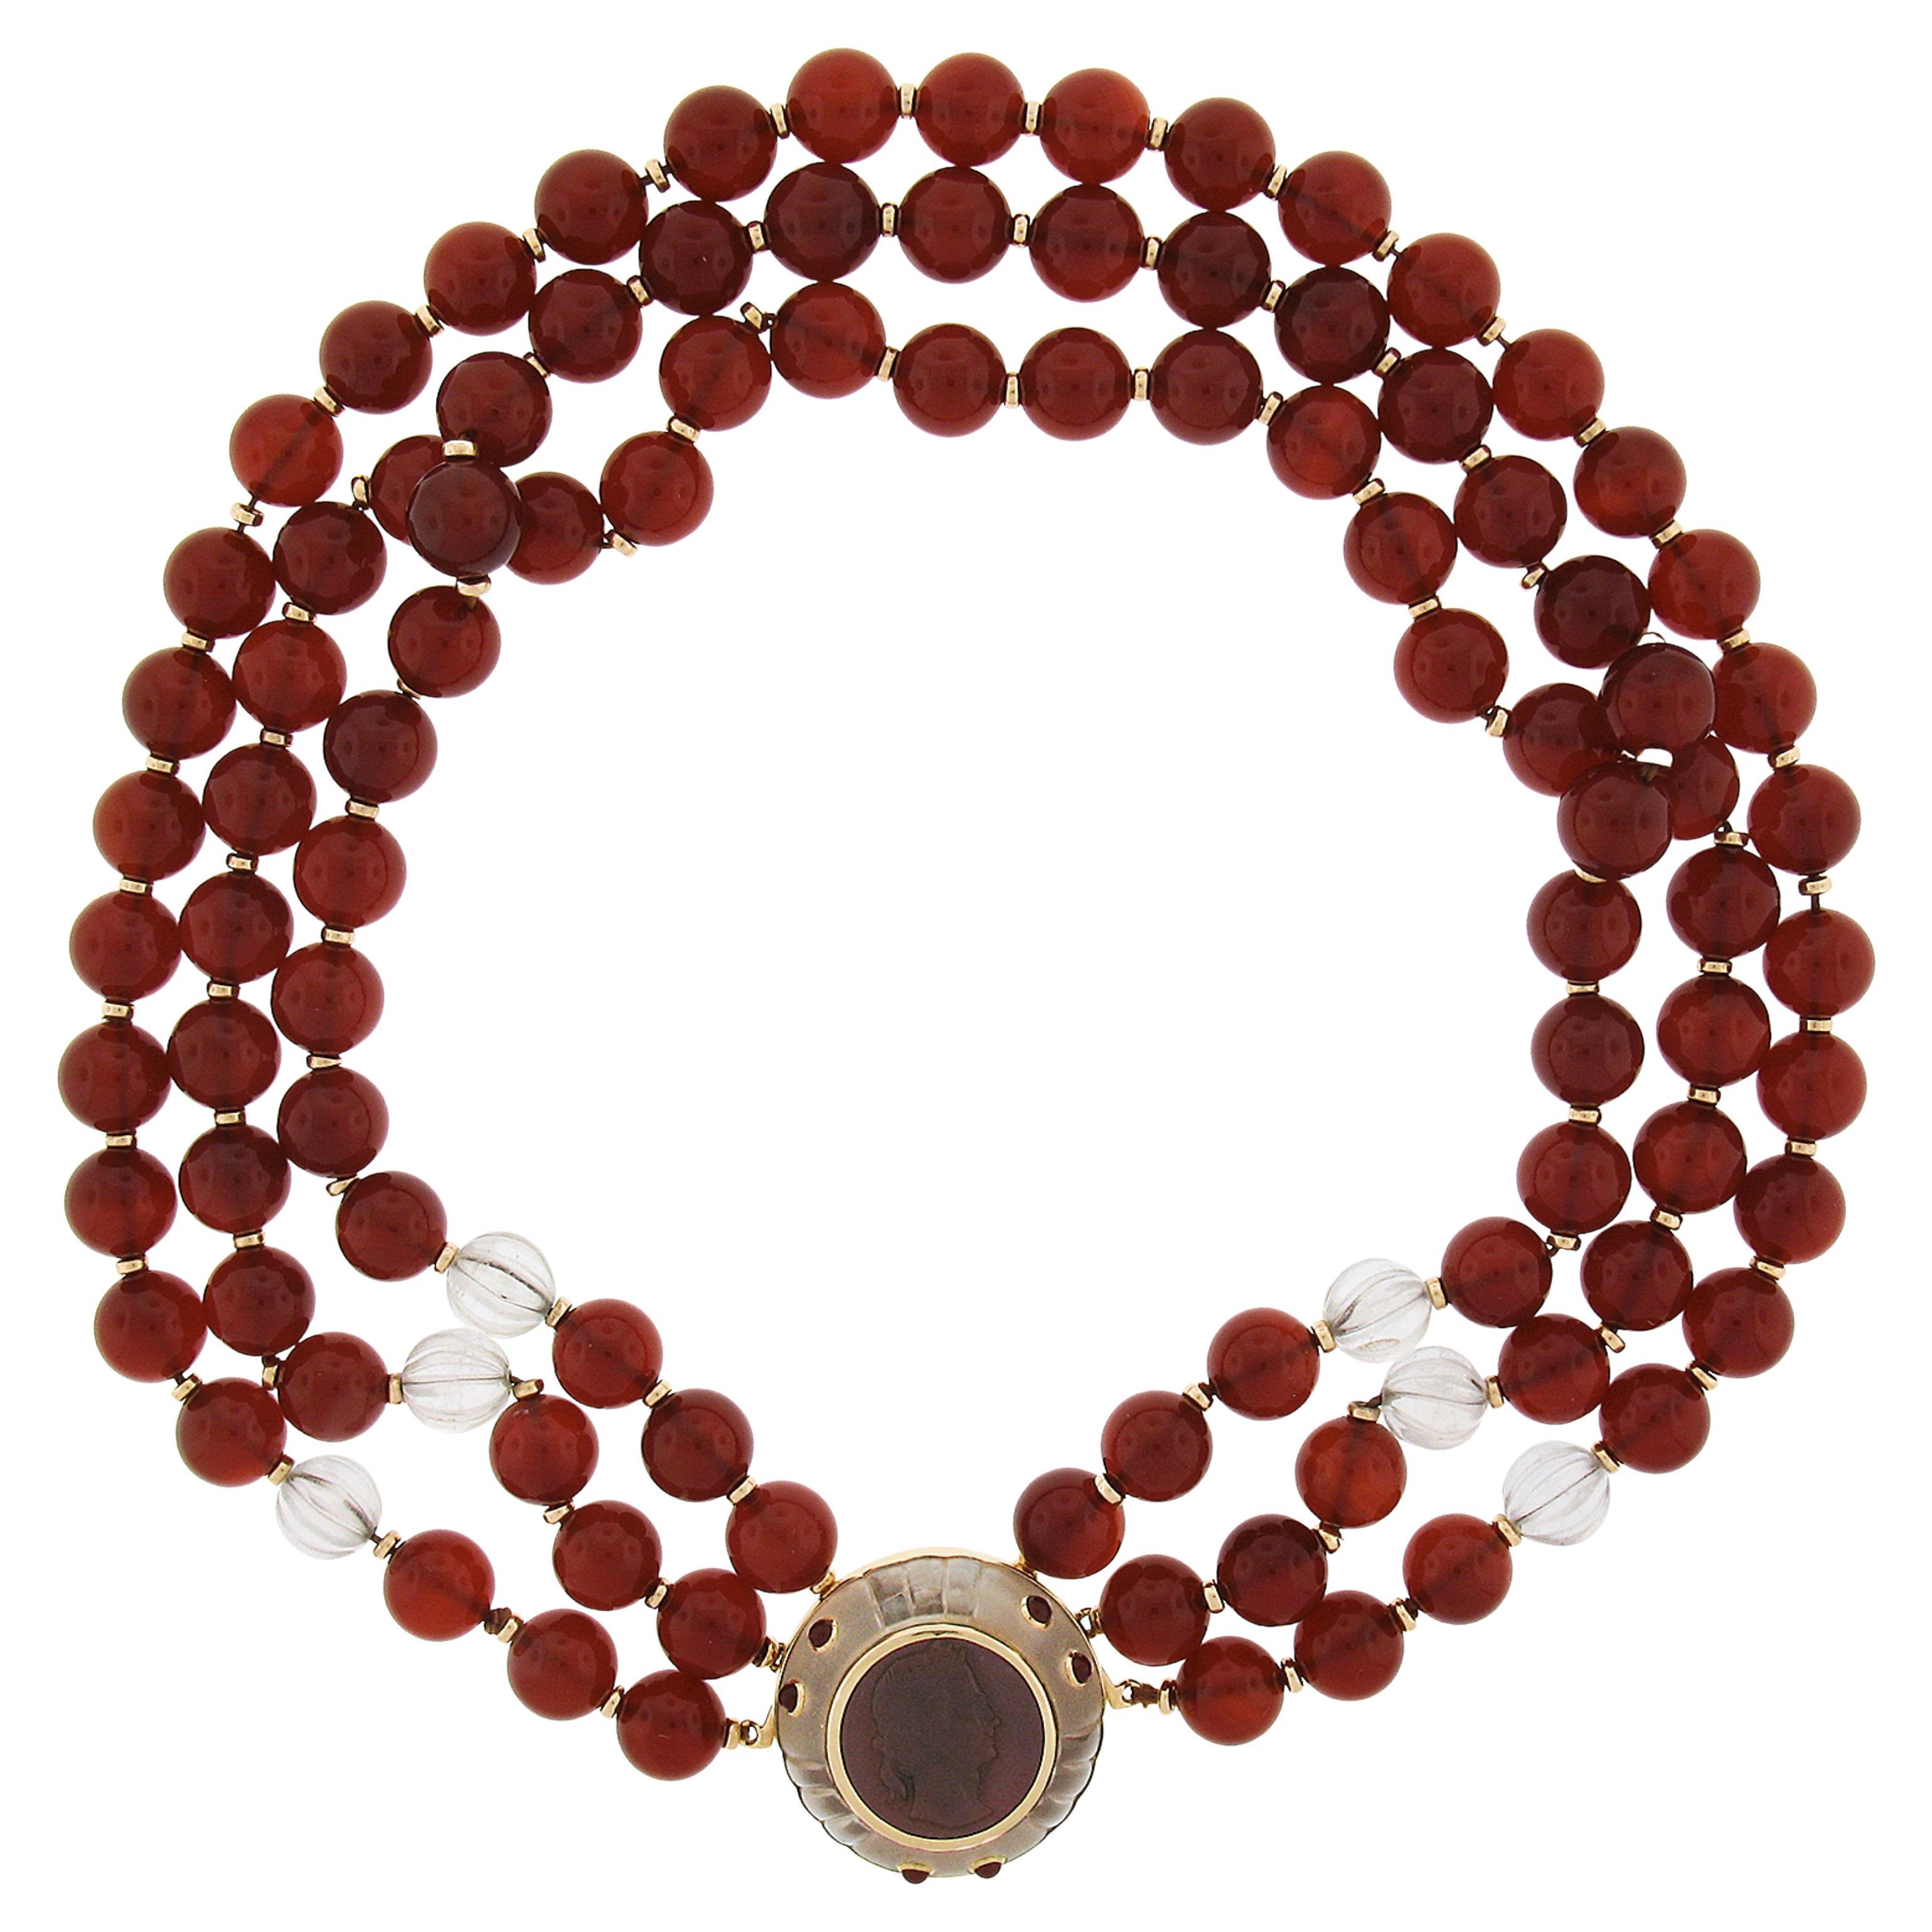 Trianon 3 Strand Carnelian & Rock Crystal Bead Necklace & Cameo 14k Gold Pendant For Sale